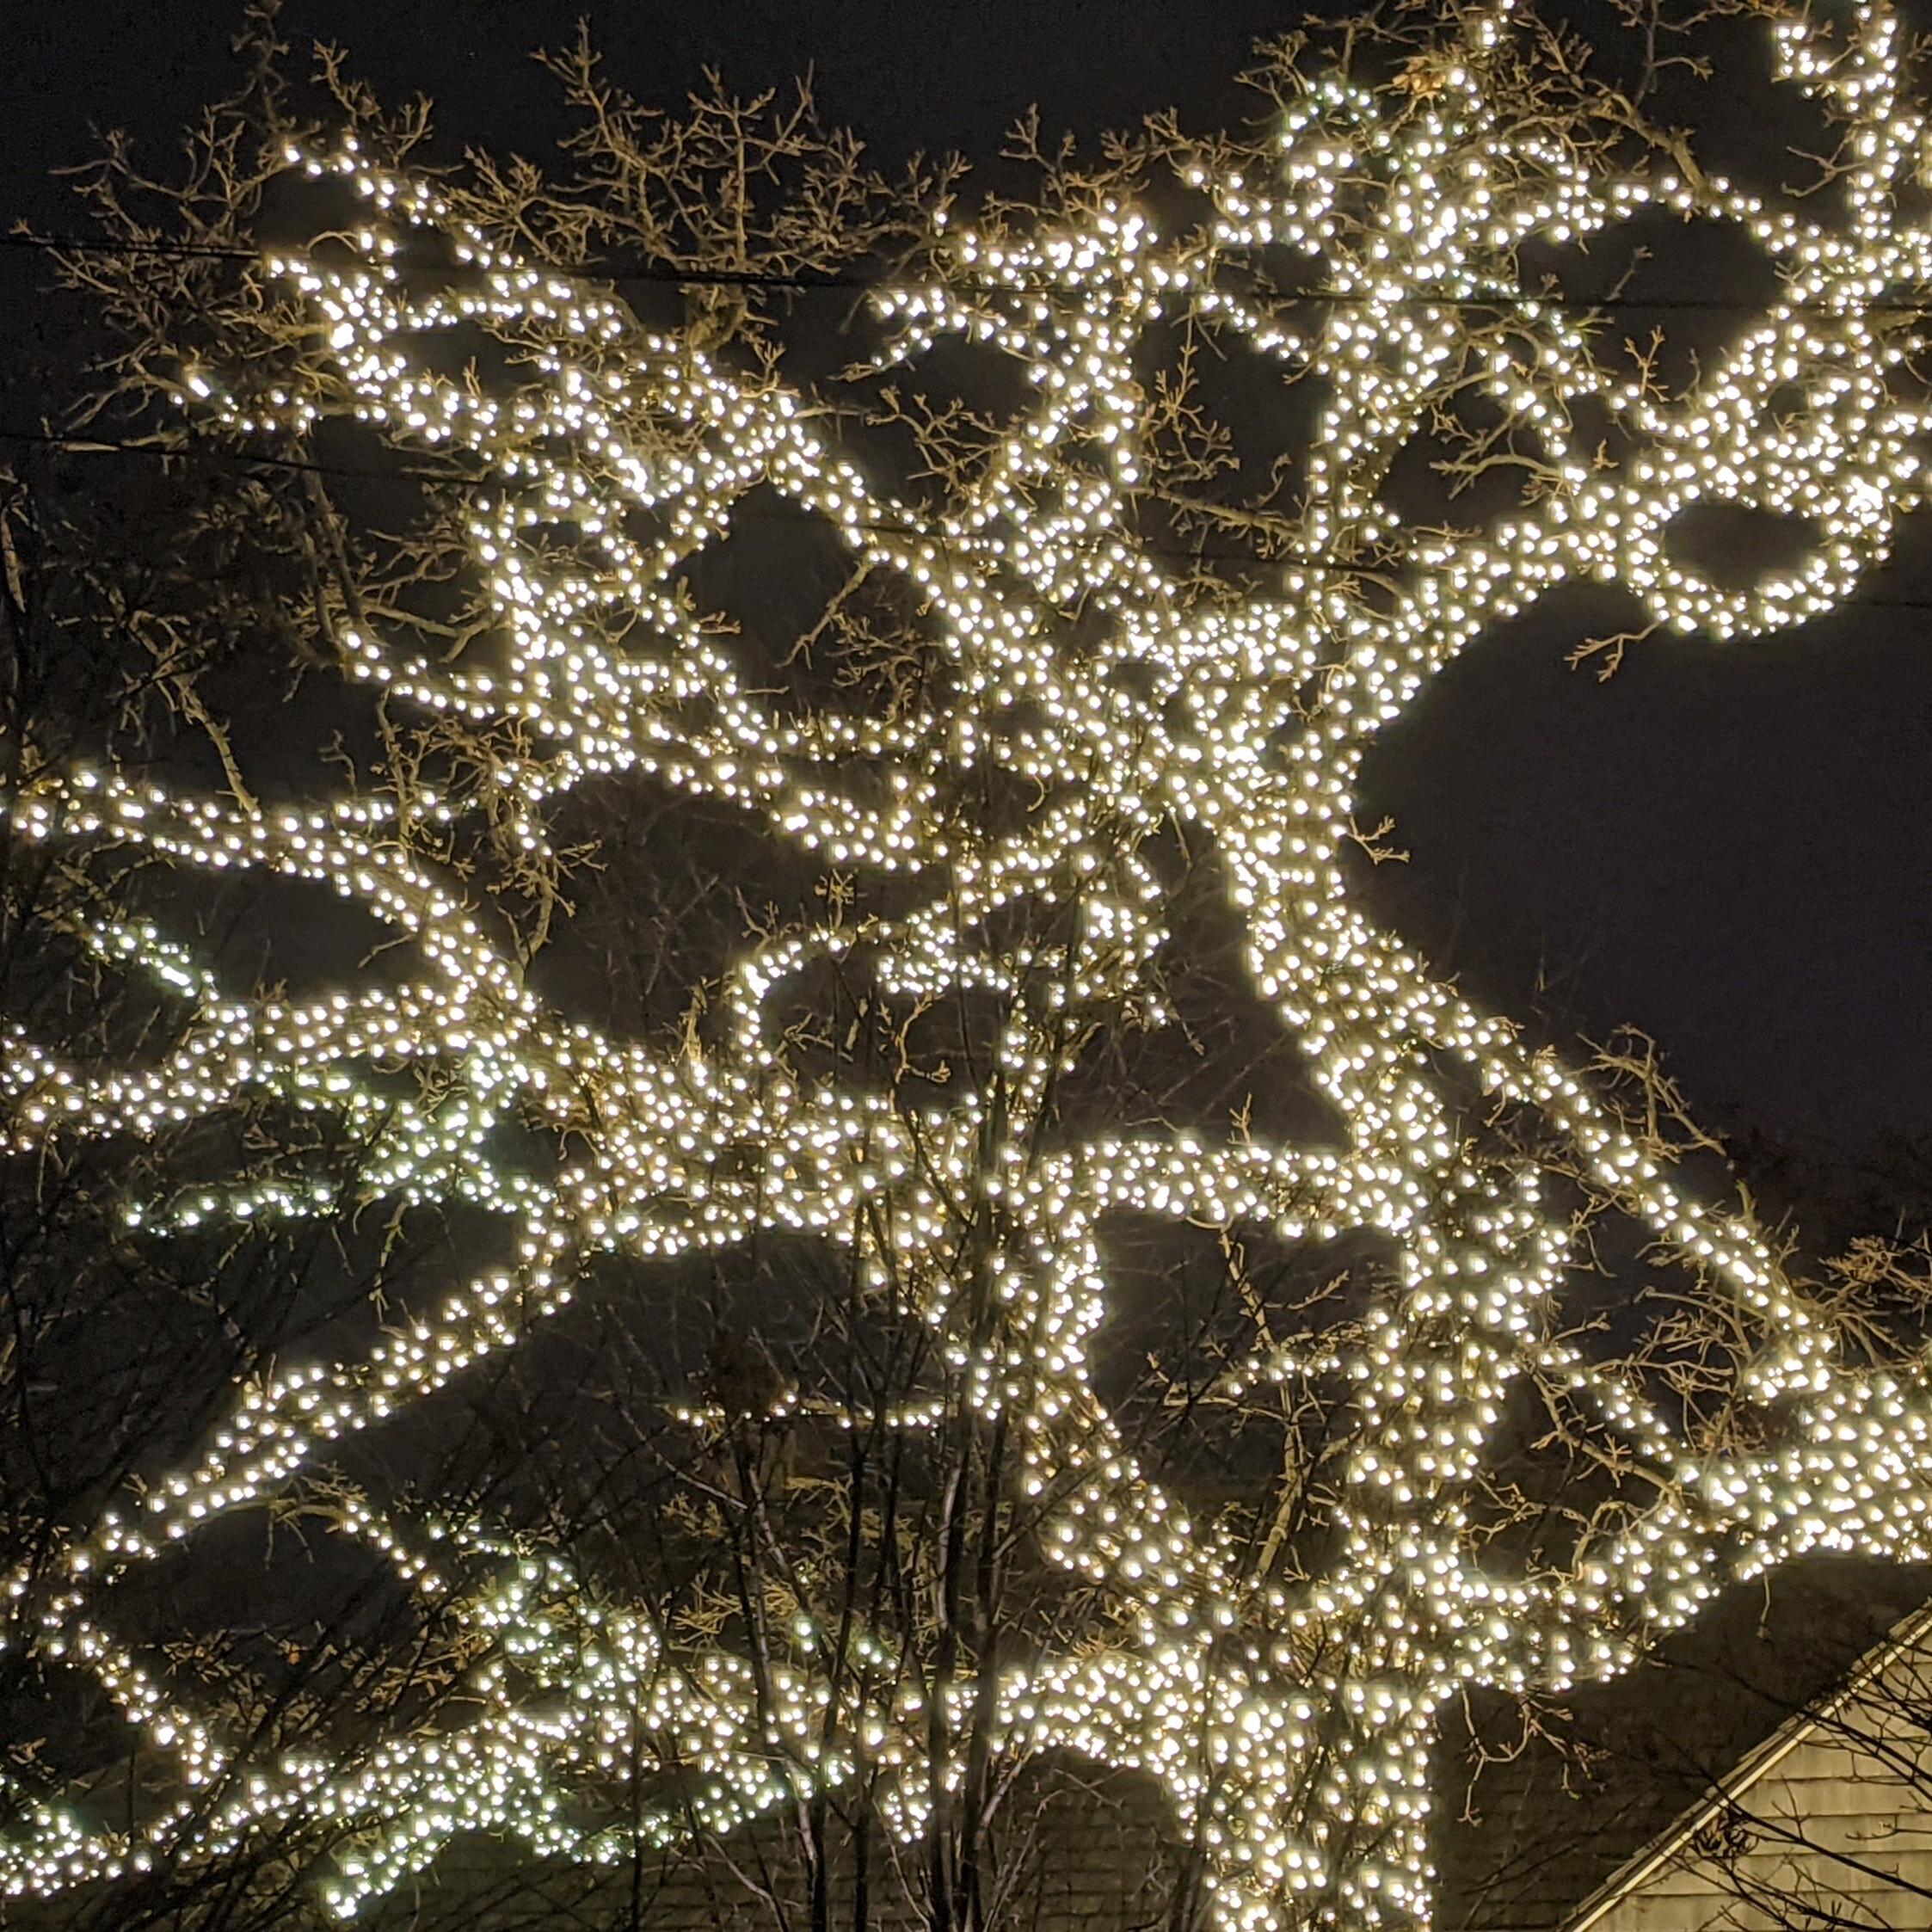 A photograph of a tree lit by thousands of white holiday lights against the night sky.